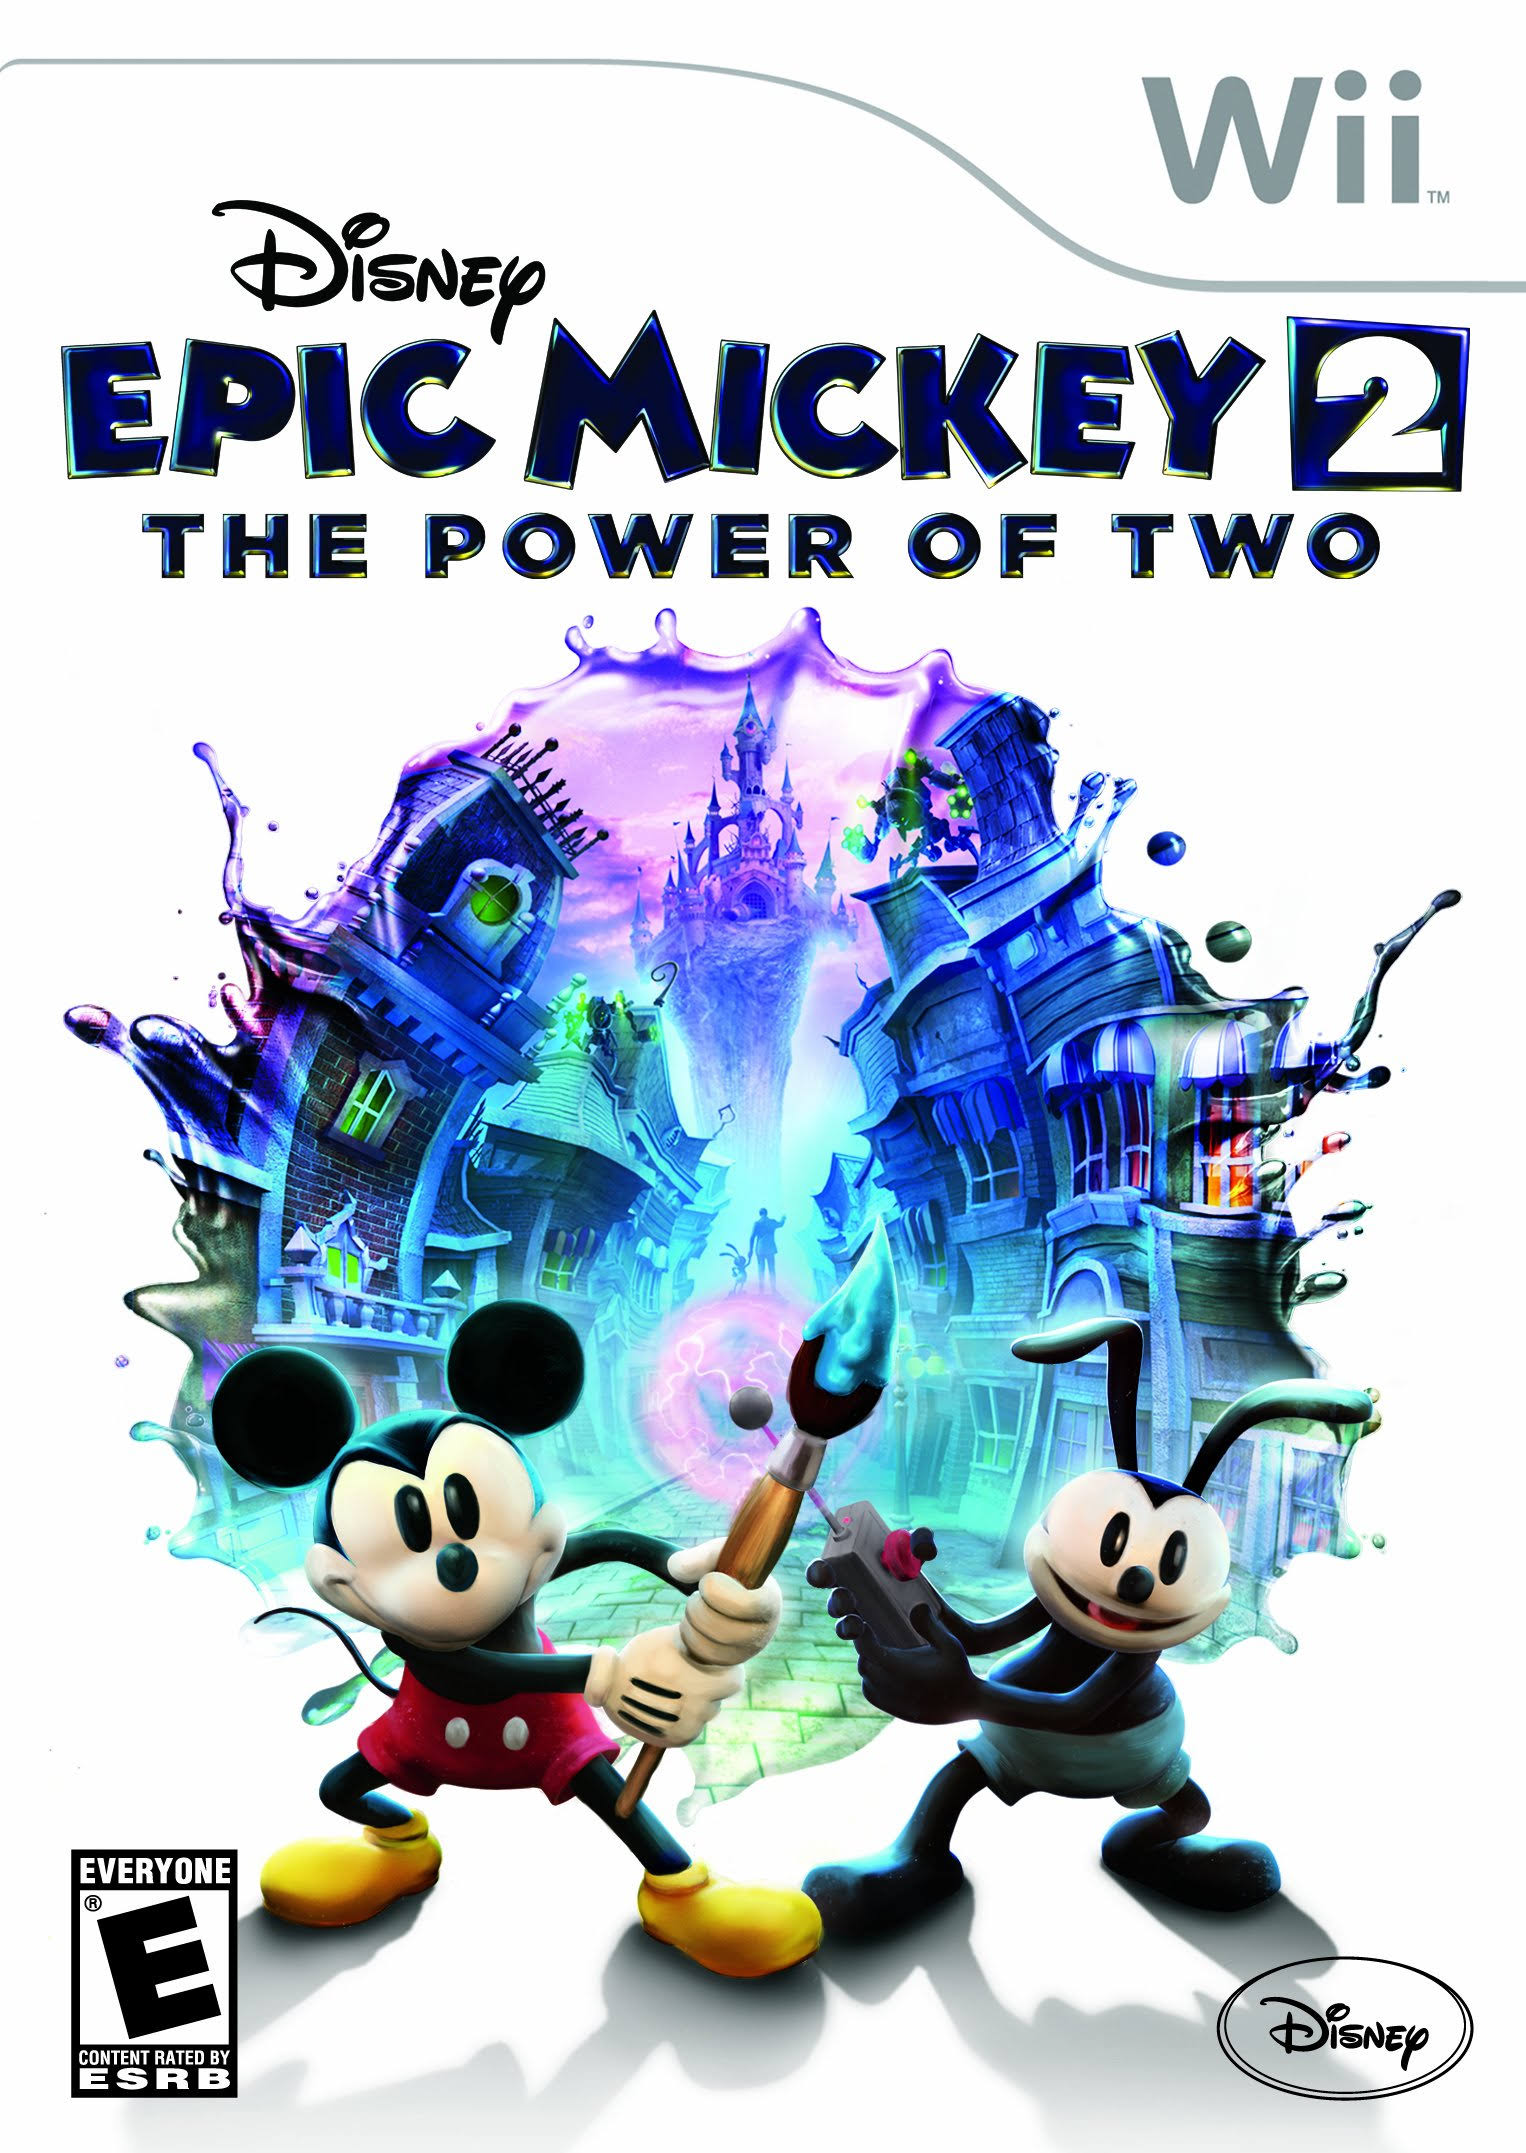 Disney Epic Mickey 2: The Power of Two - Nintendo Wii